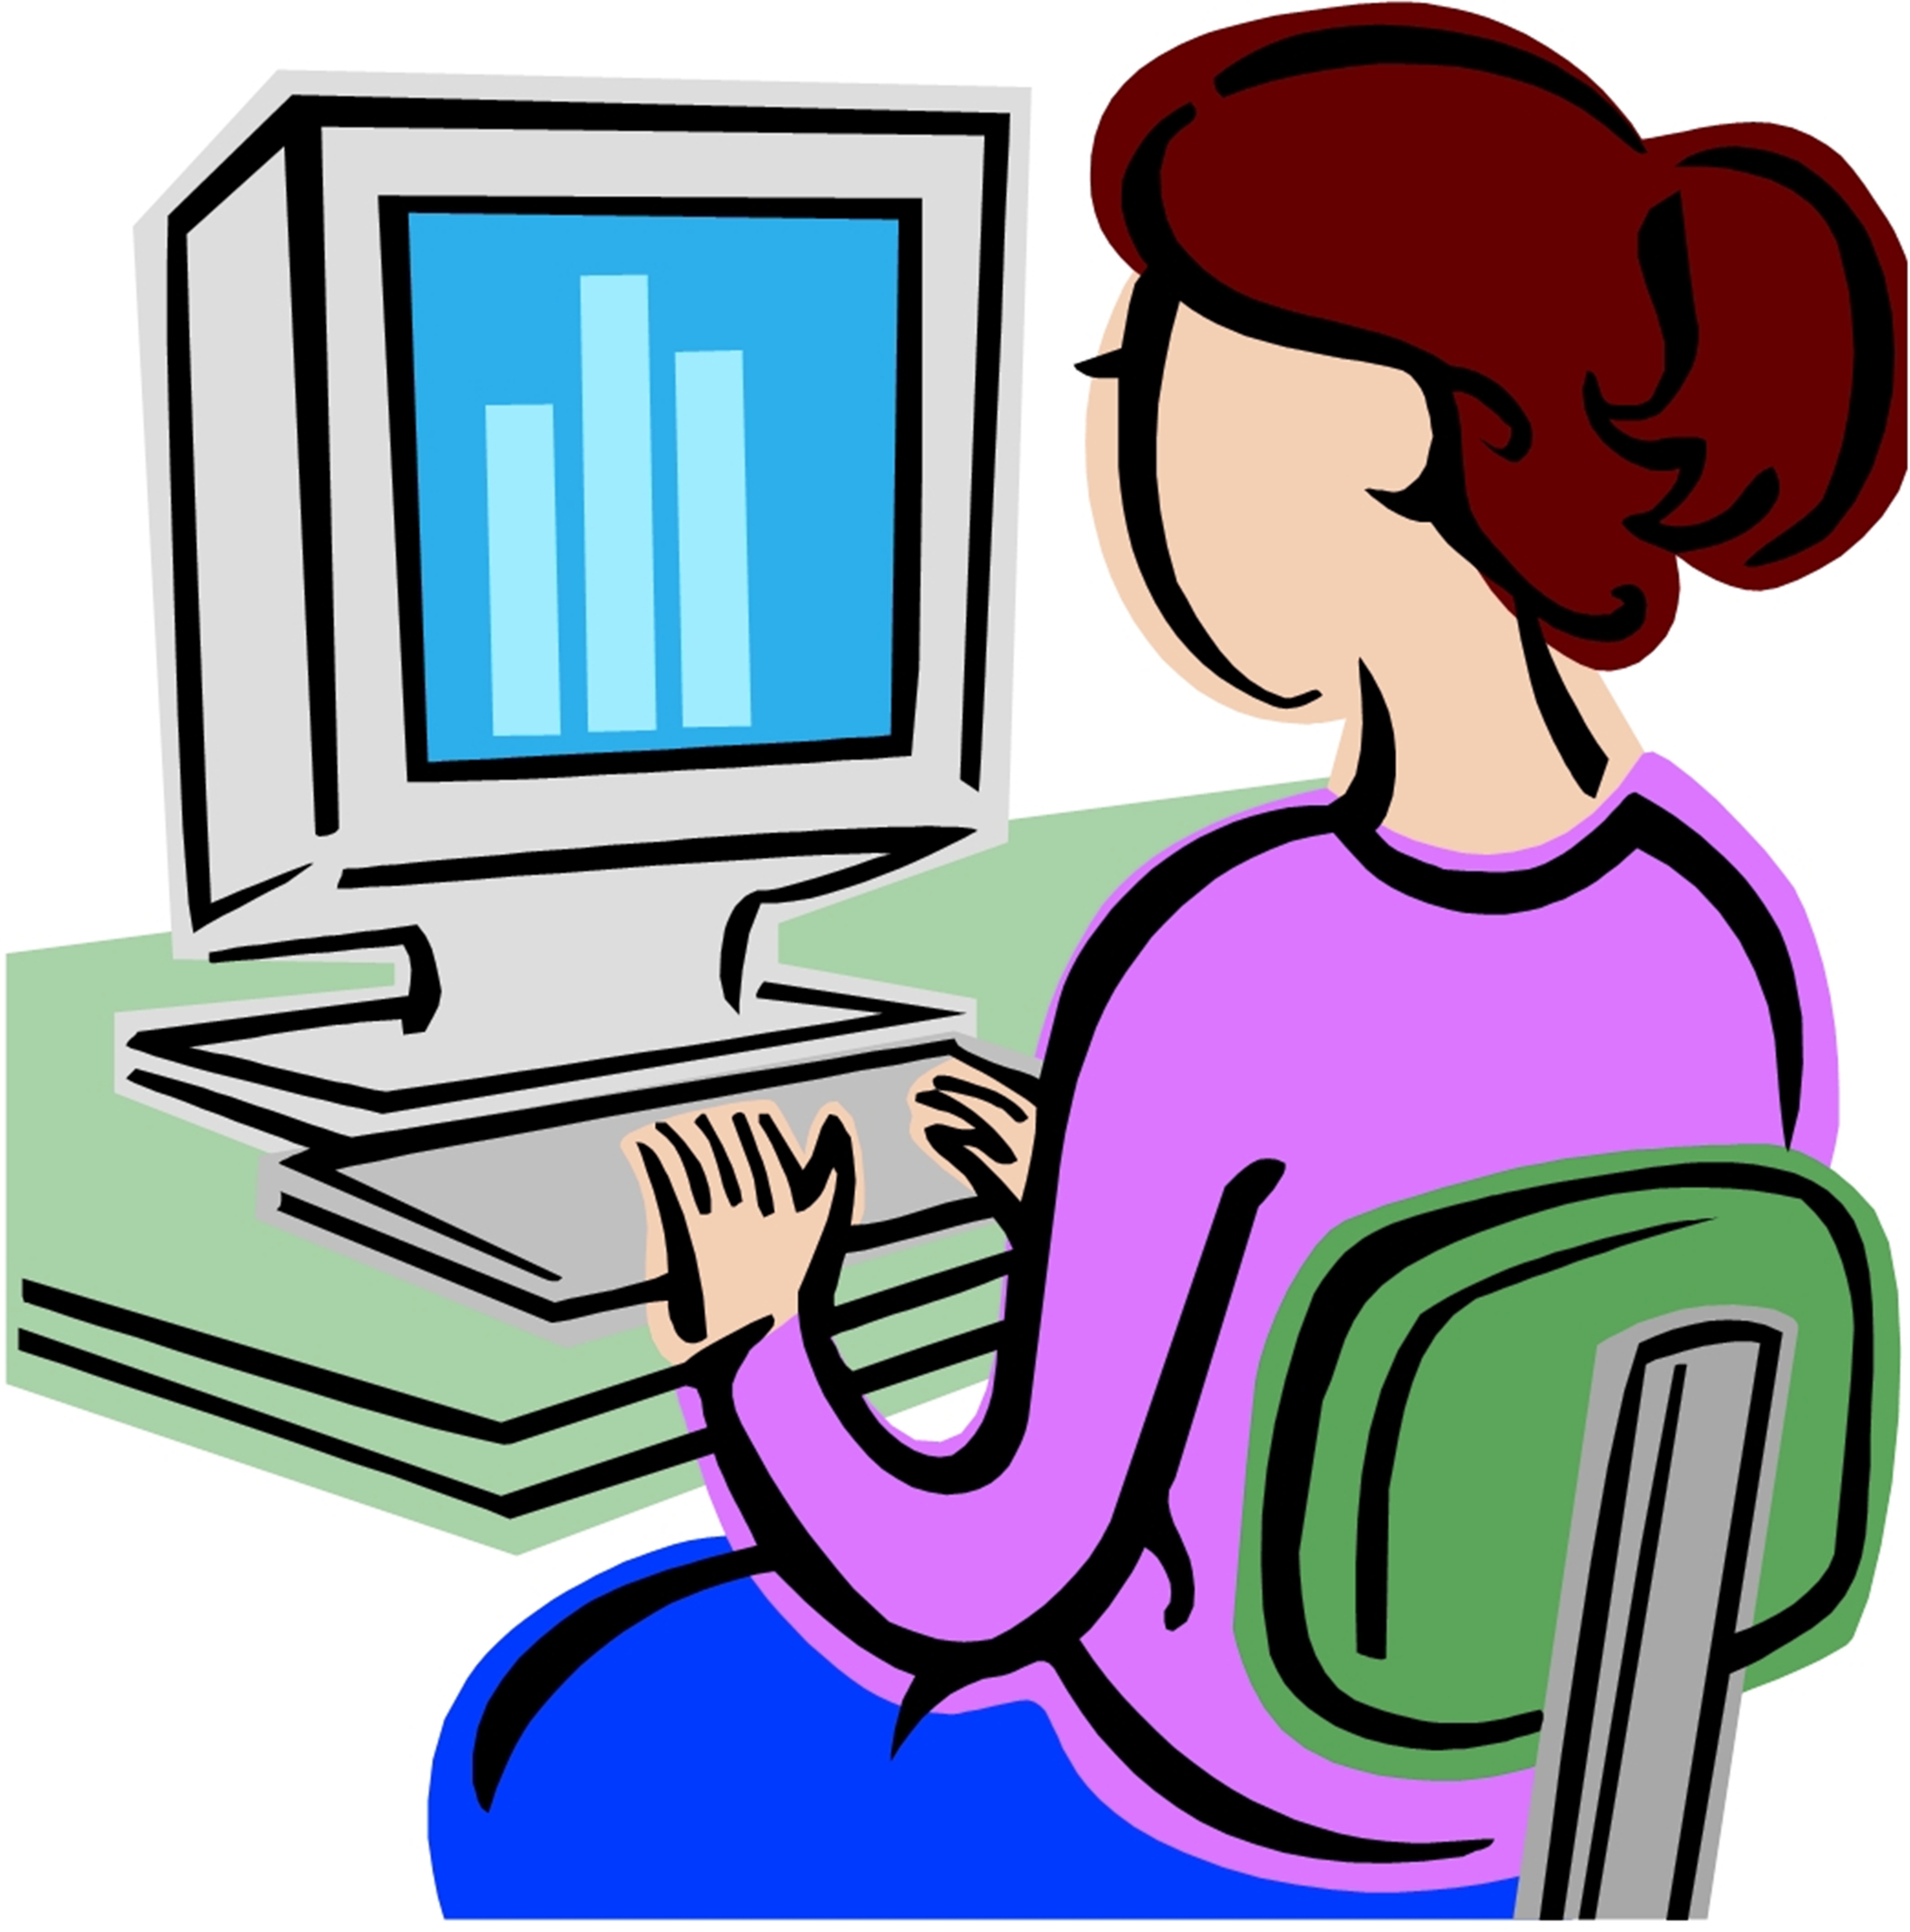 What is clipart in computer